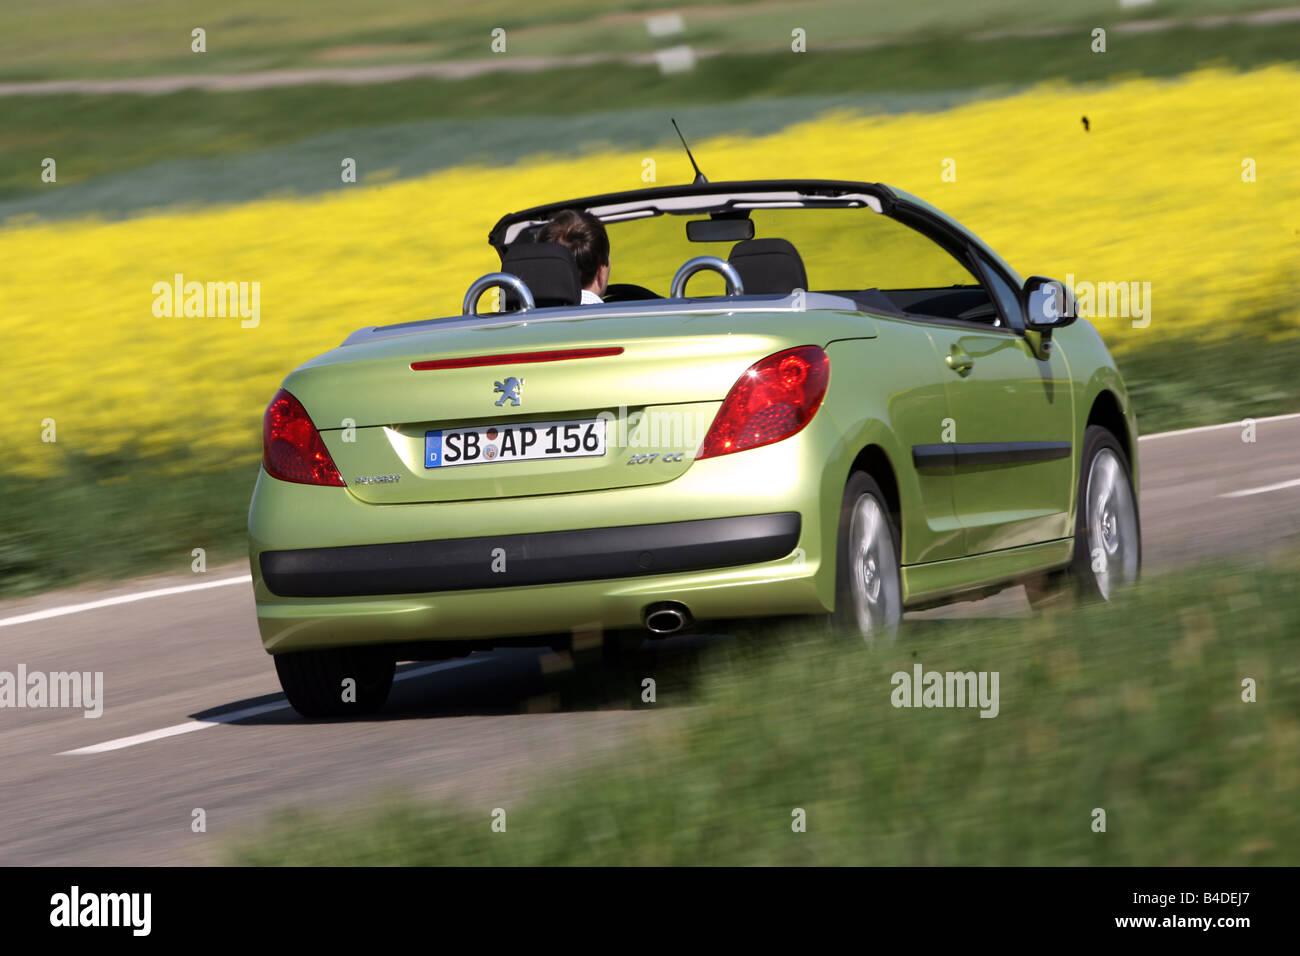 Peugeot 207 CC 120 Sport, model year 2007-, green, driving, diagonal from the back, rear view, country road, open top Stock Photo